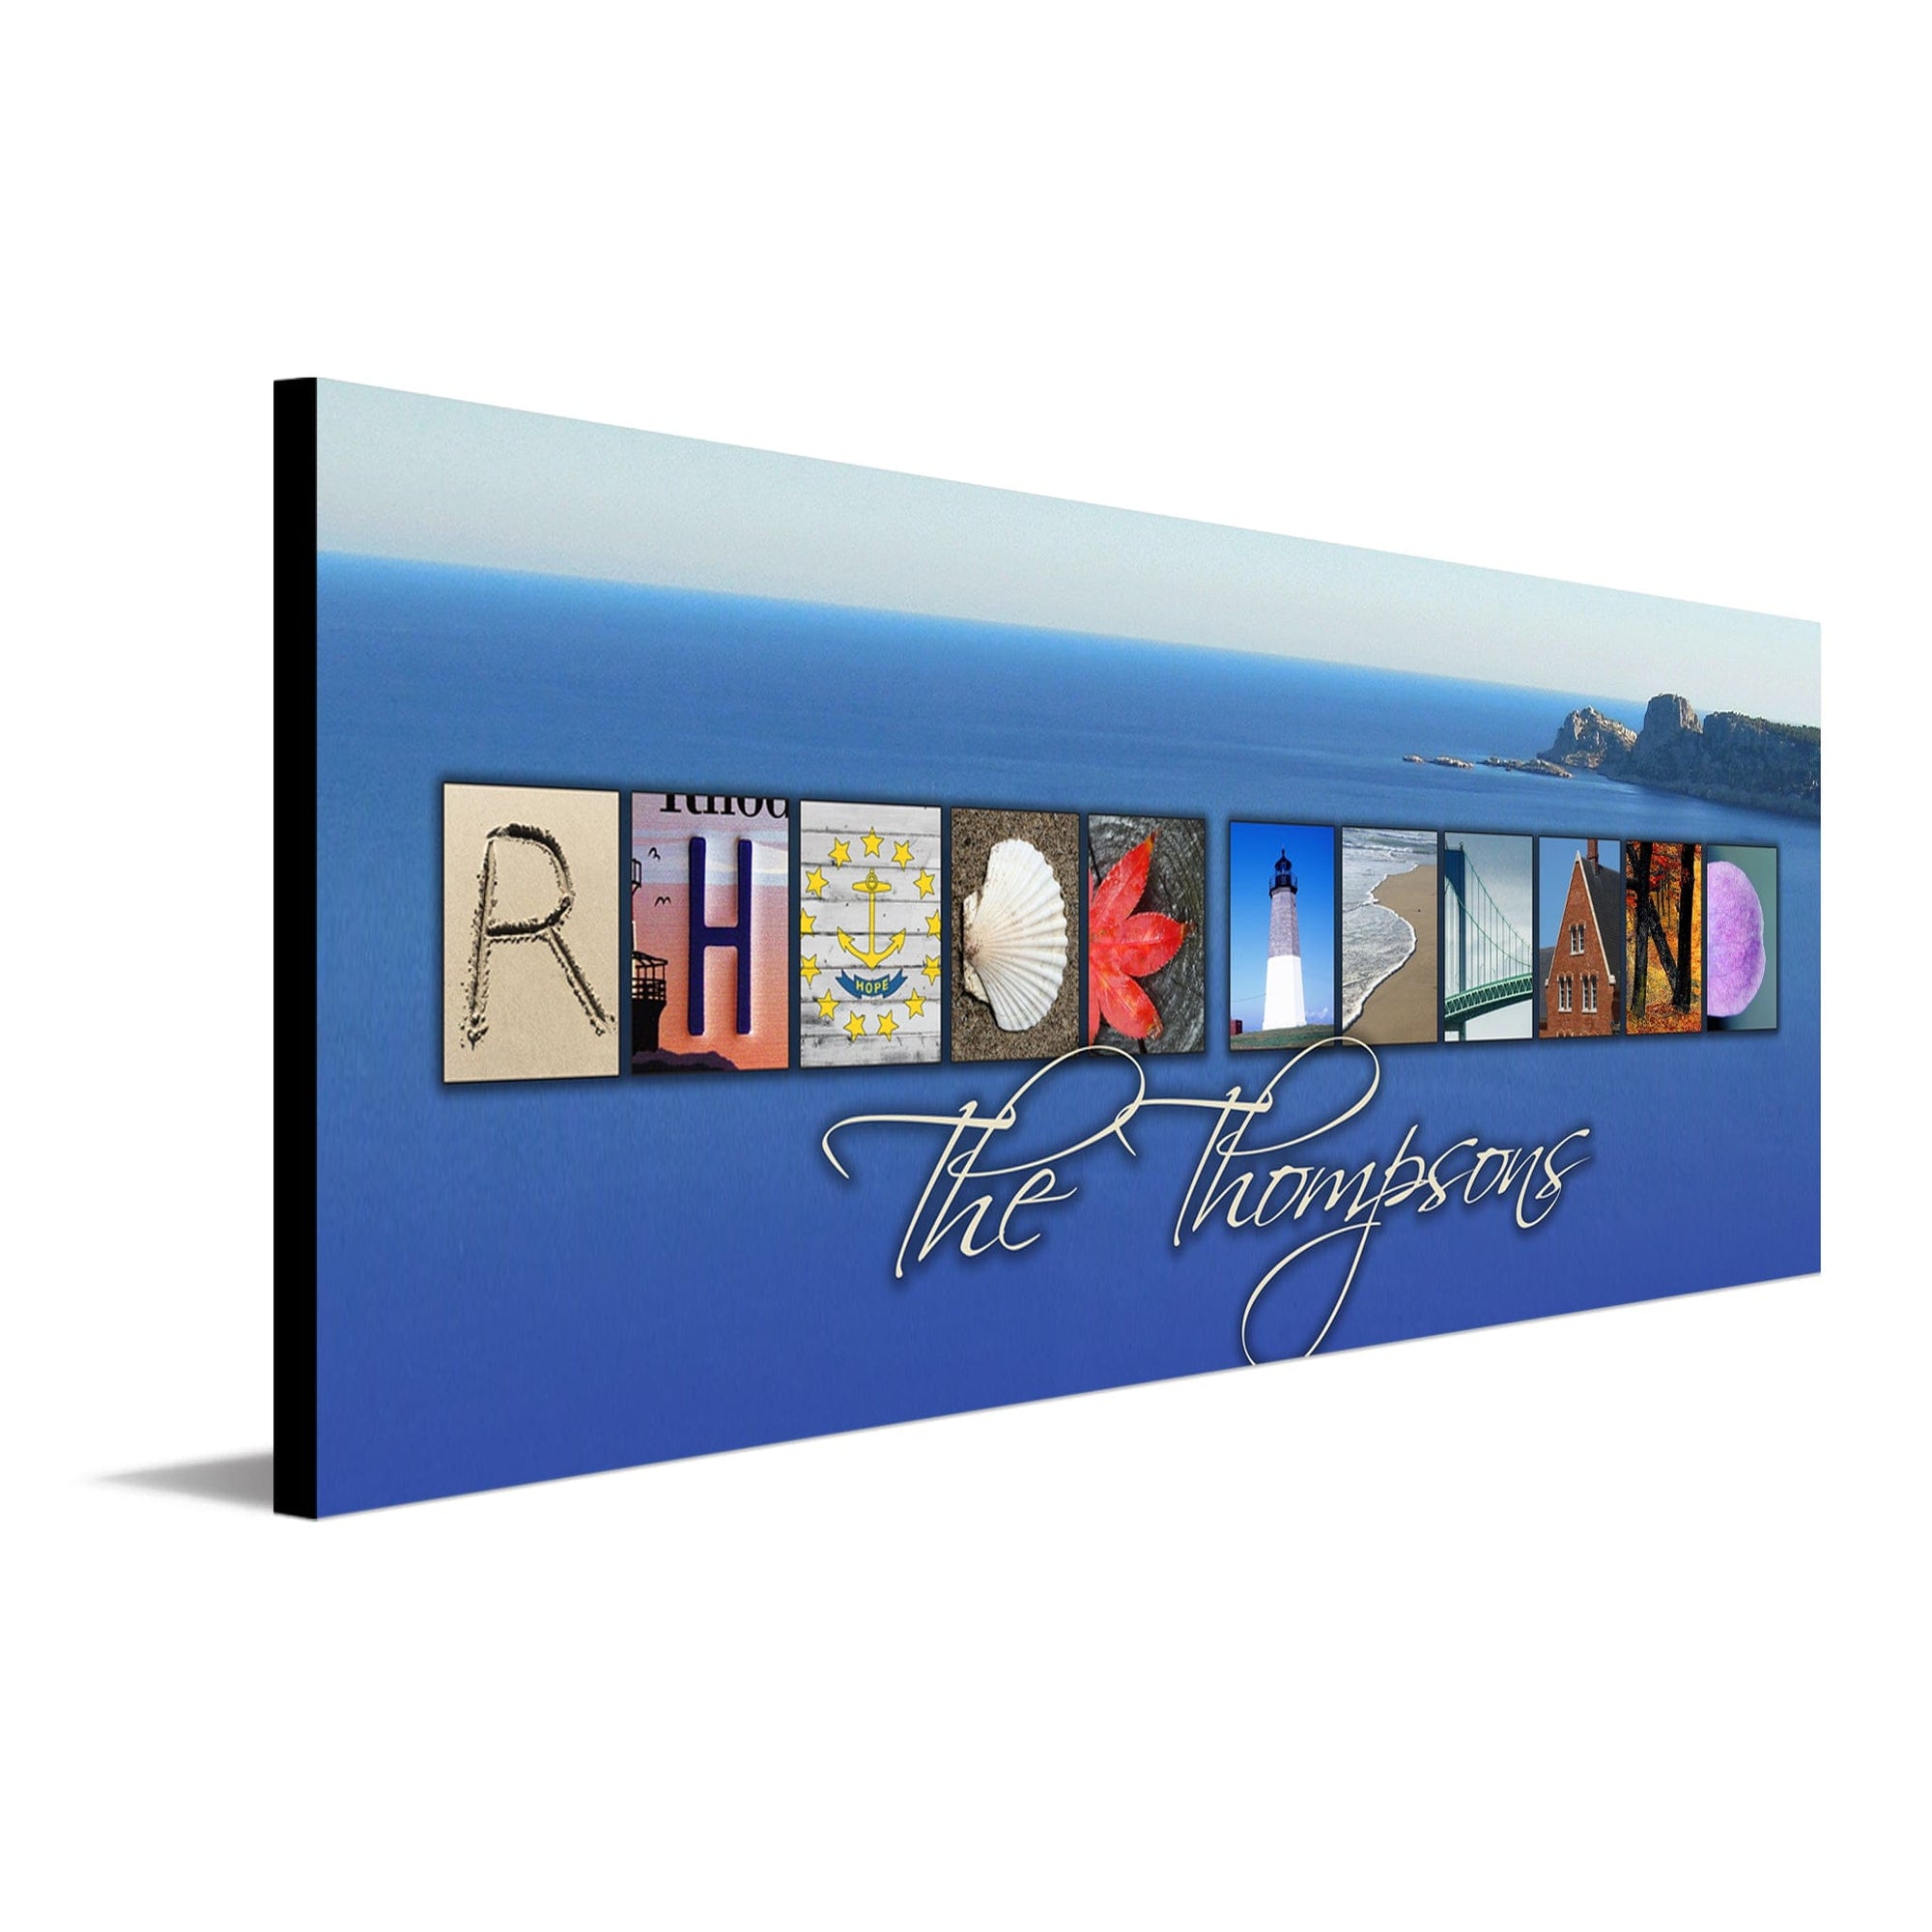 Personalized Rhode Island art using images to spell the words Rhode Island - Personal-Prints